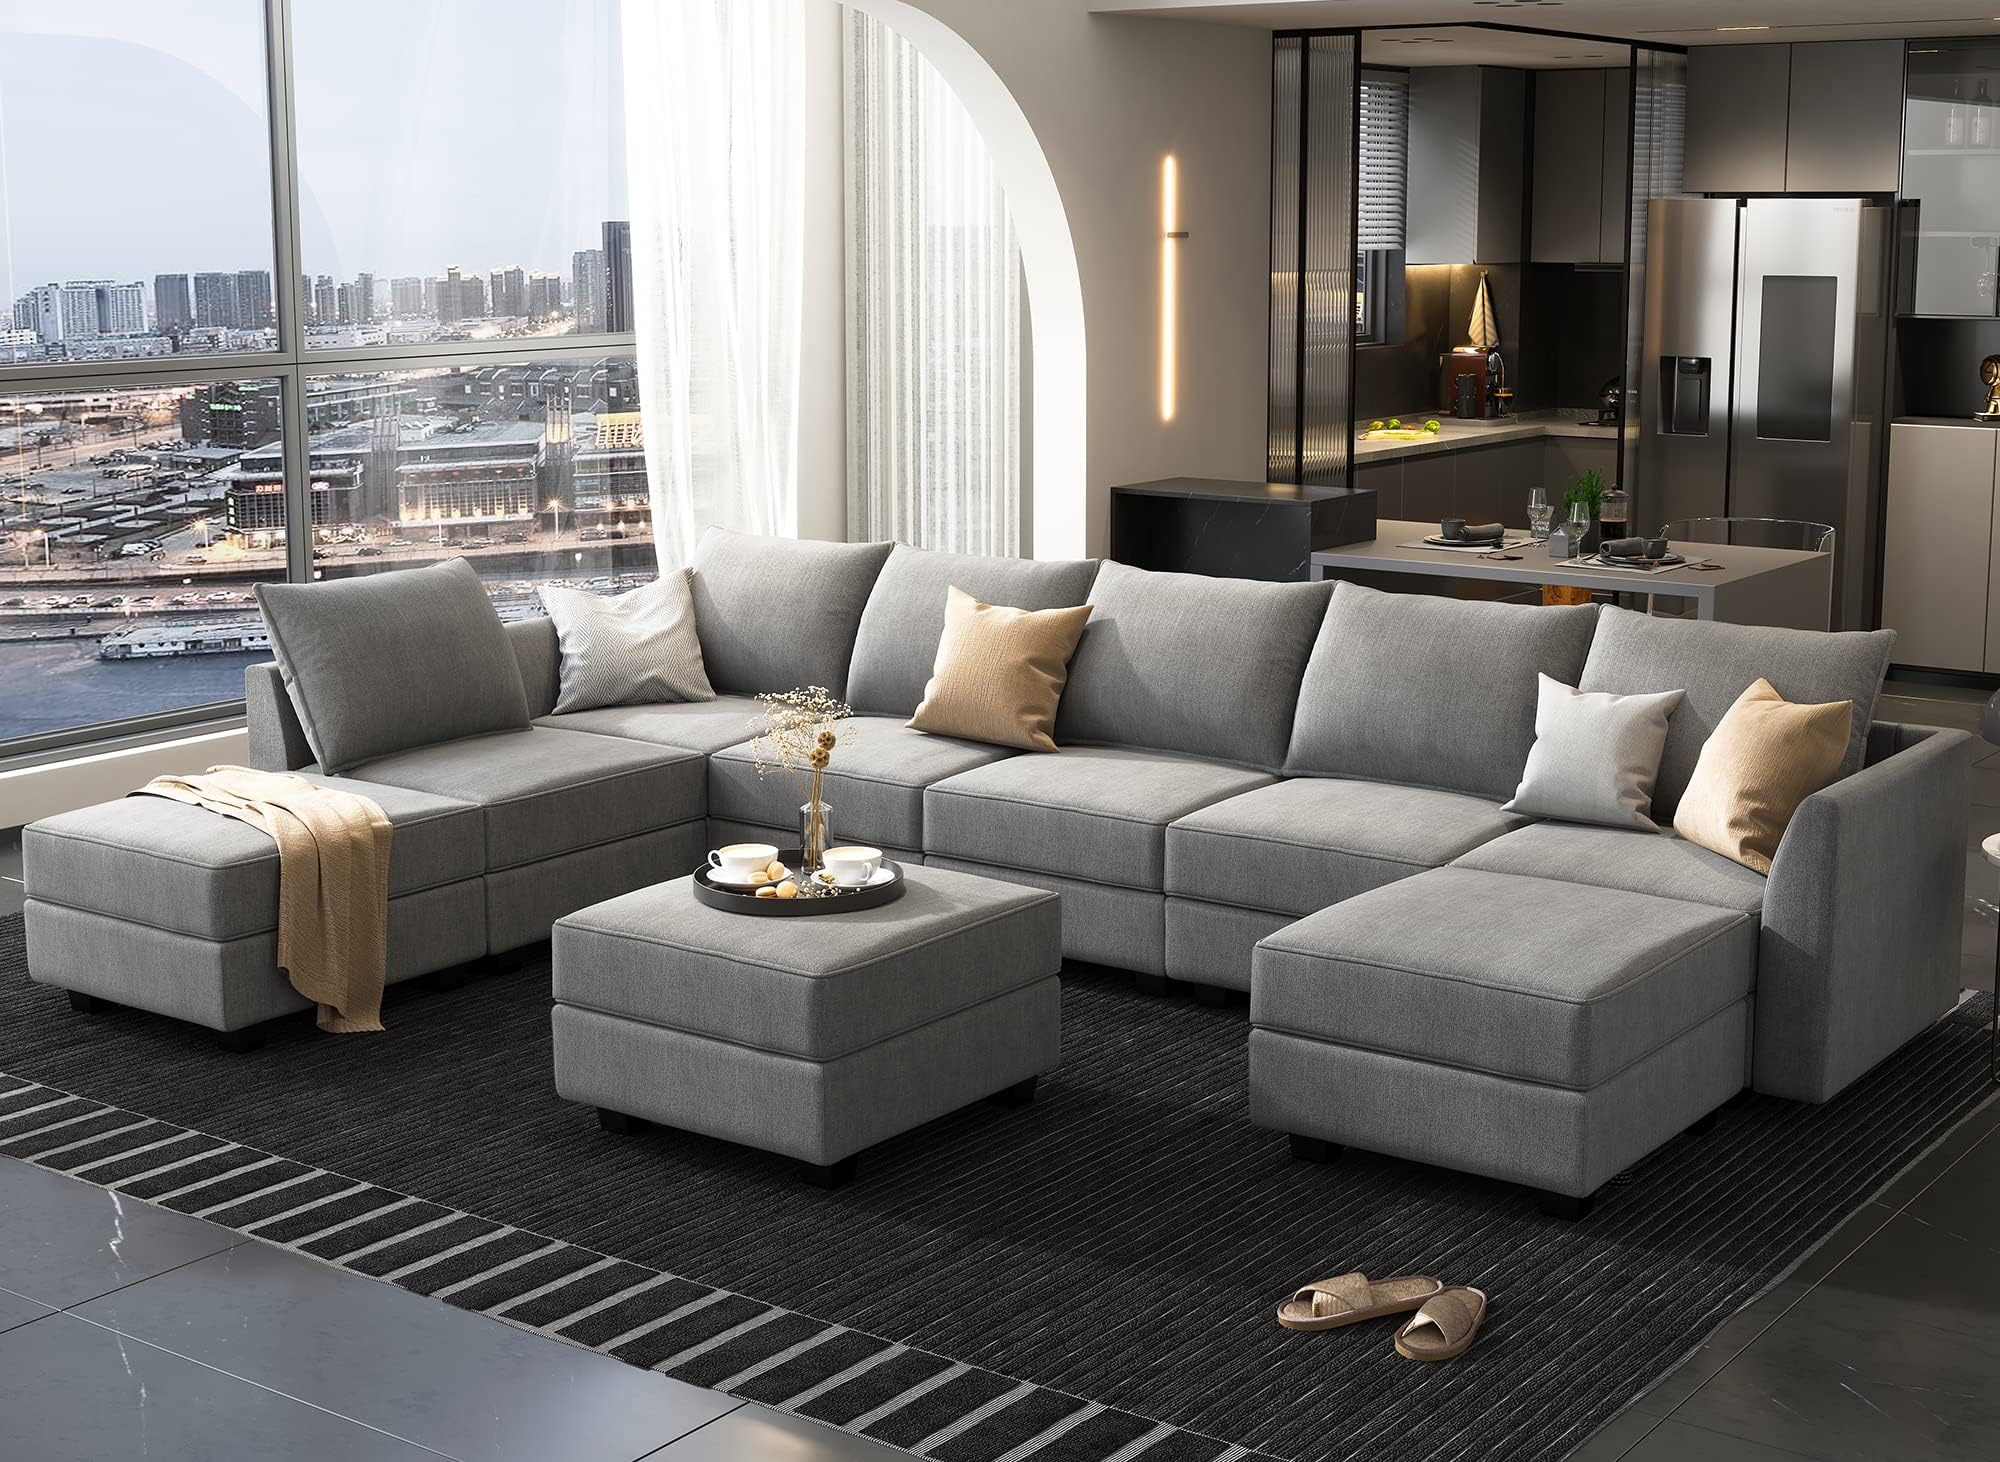 HONBAY Oversized Sectional Sofa with Wide Chaise Reversible Sectional Modular Sofa Couch with Ottomans U Shaped Corner Sectional